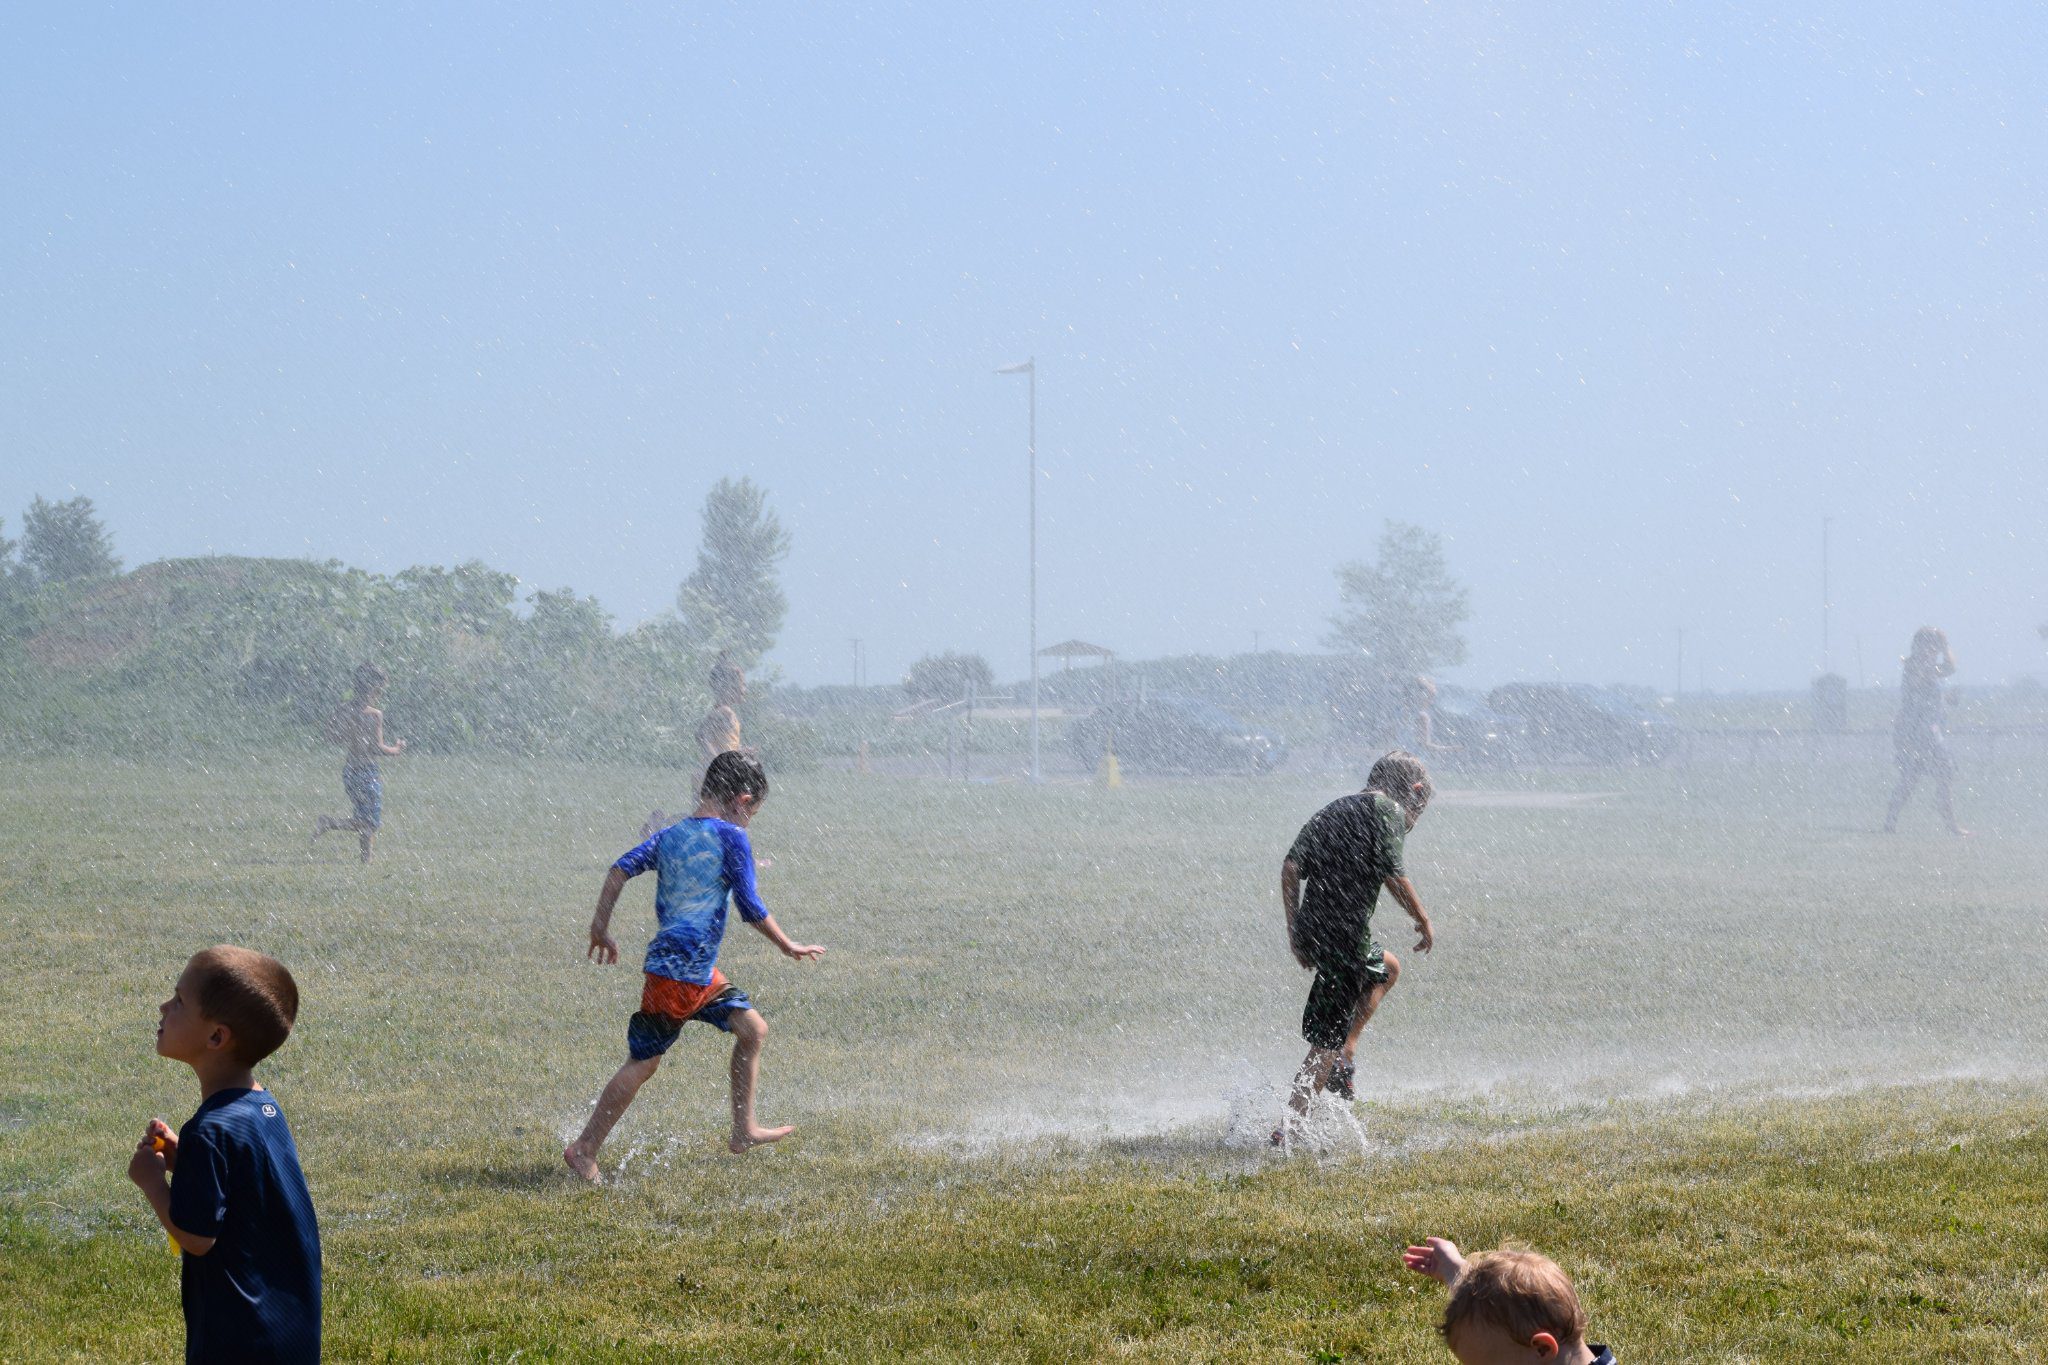 Splash Pad cooling down on a hot day 002